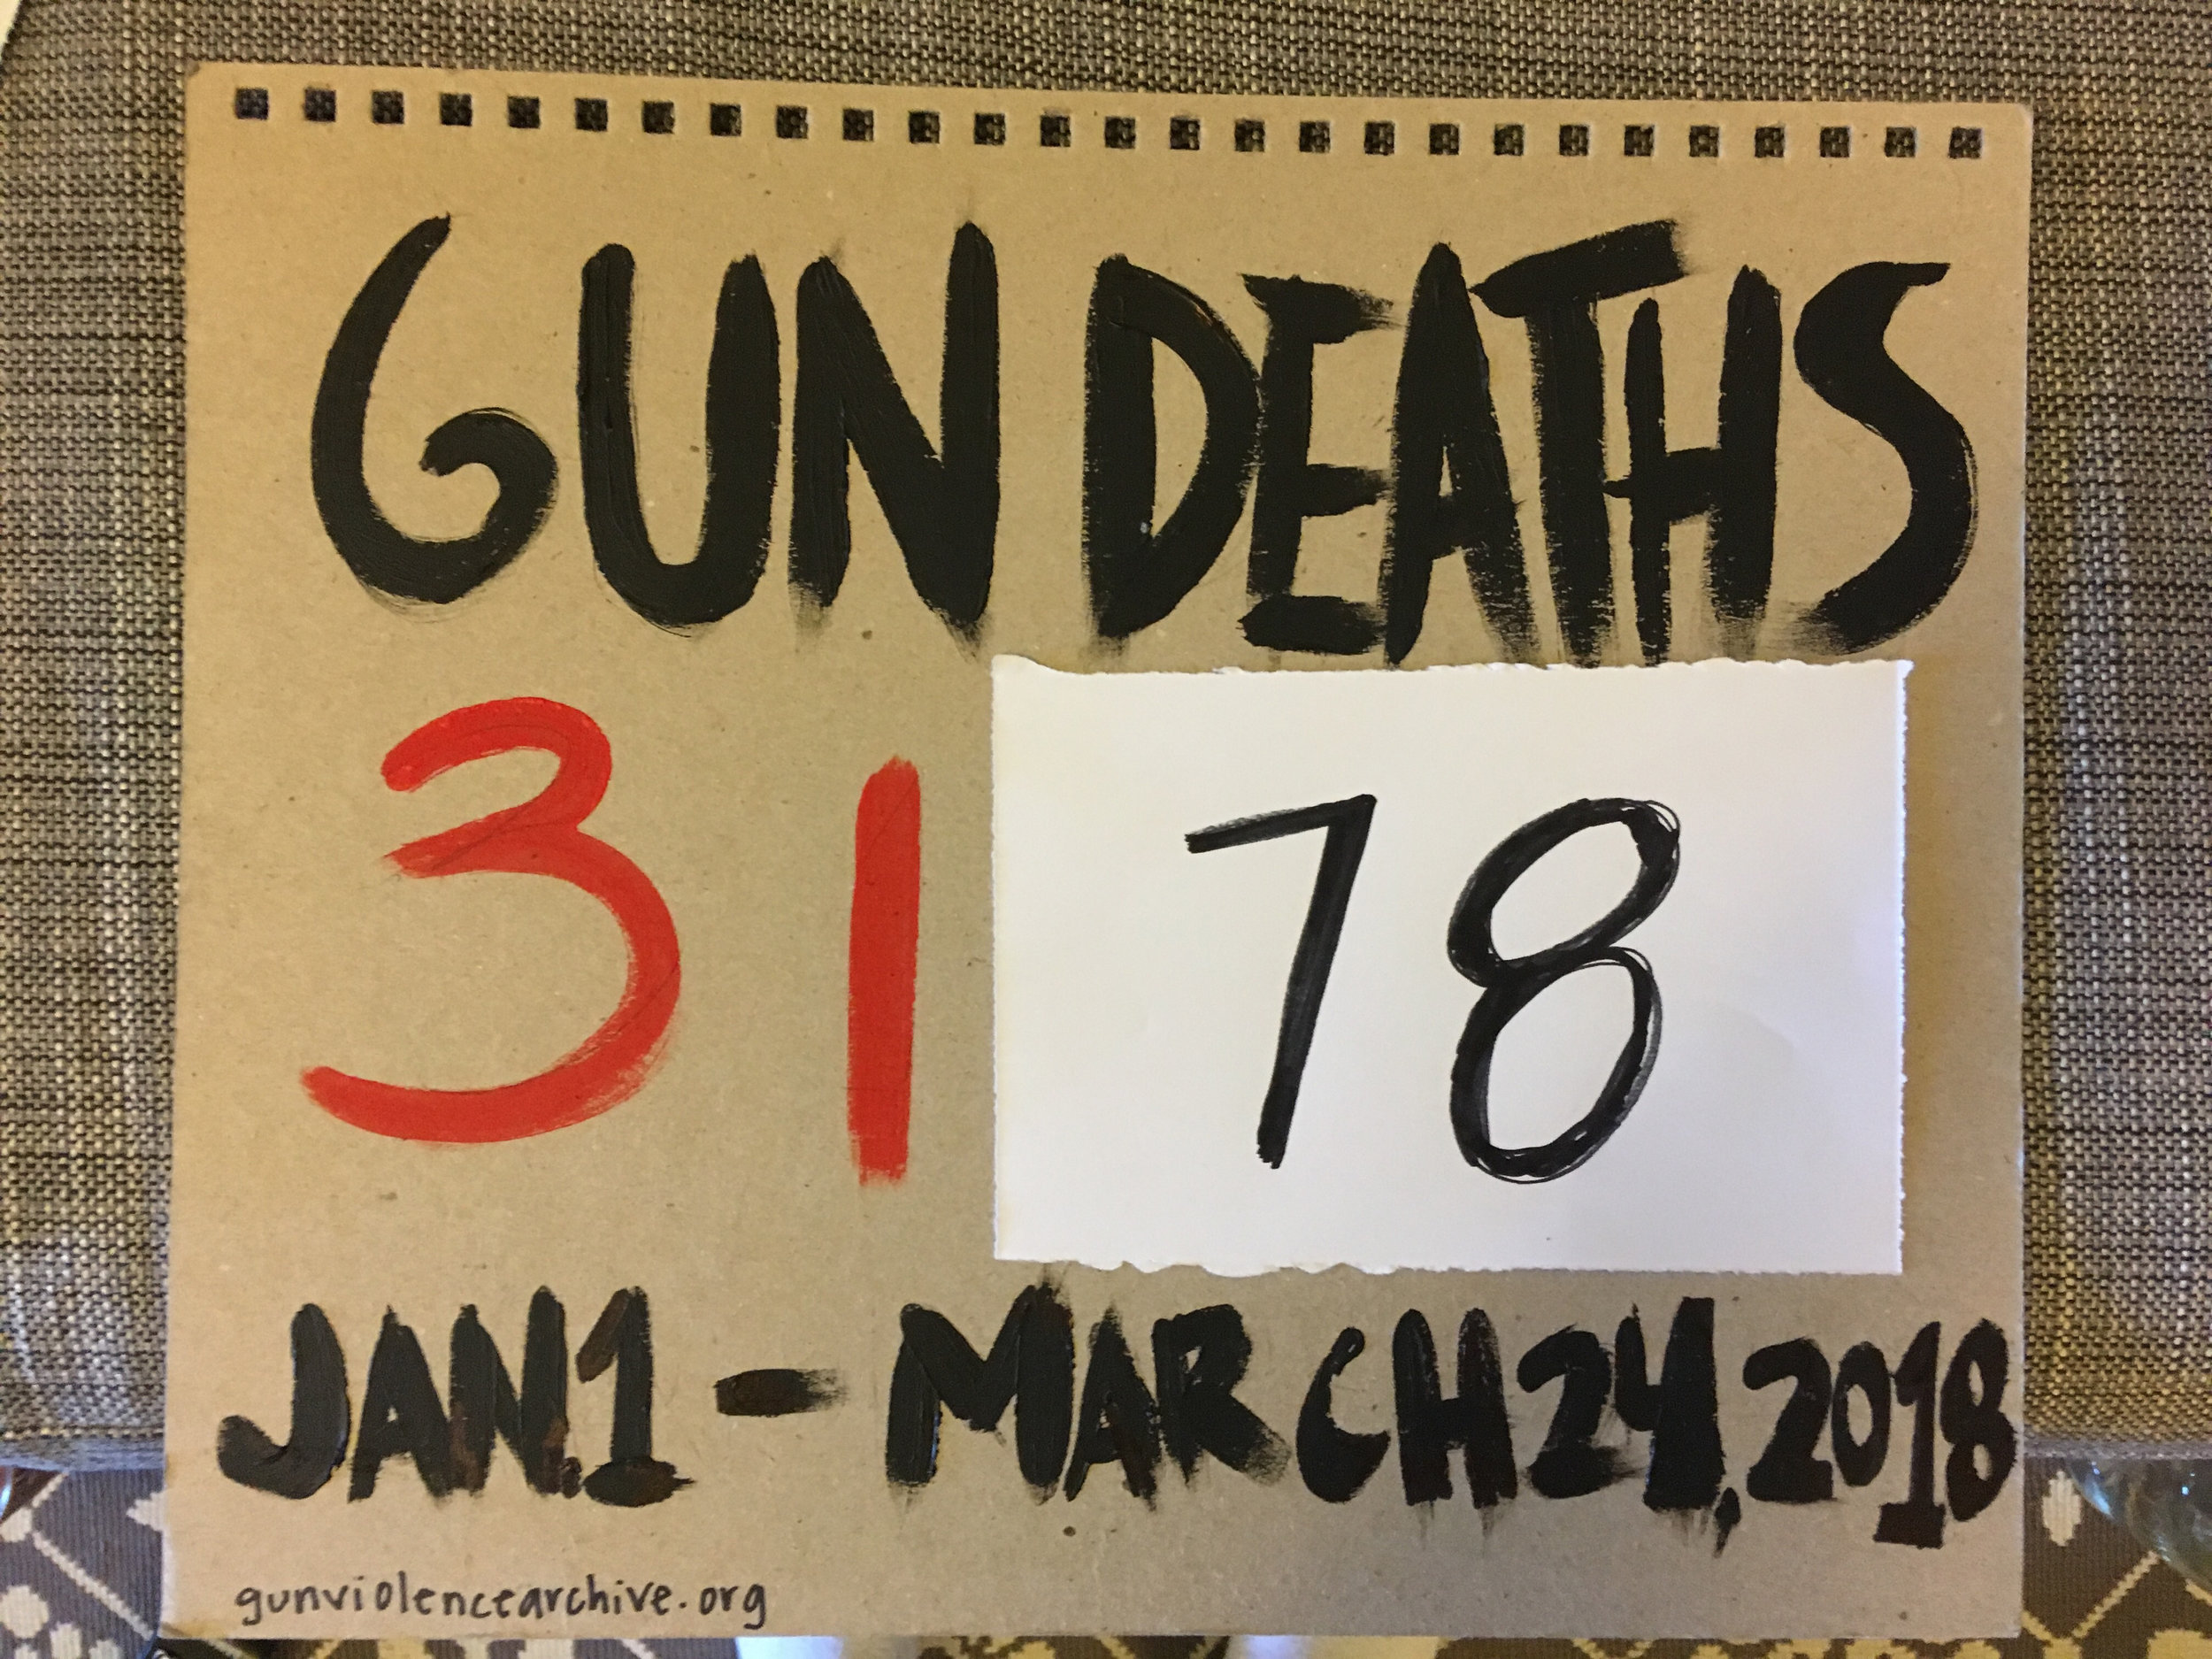  the updated number of gun deaths on March 24, one day later 